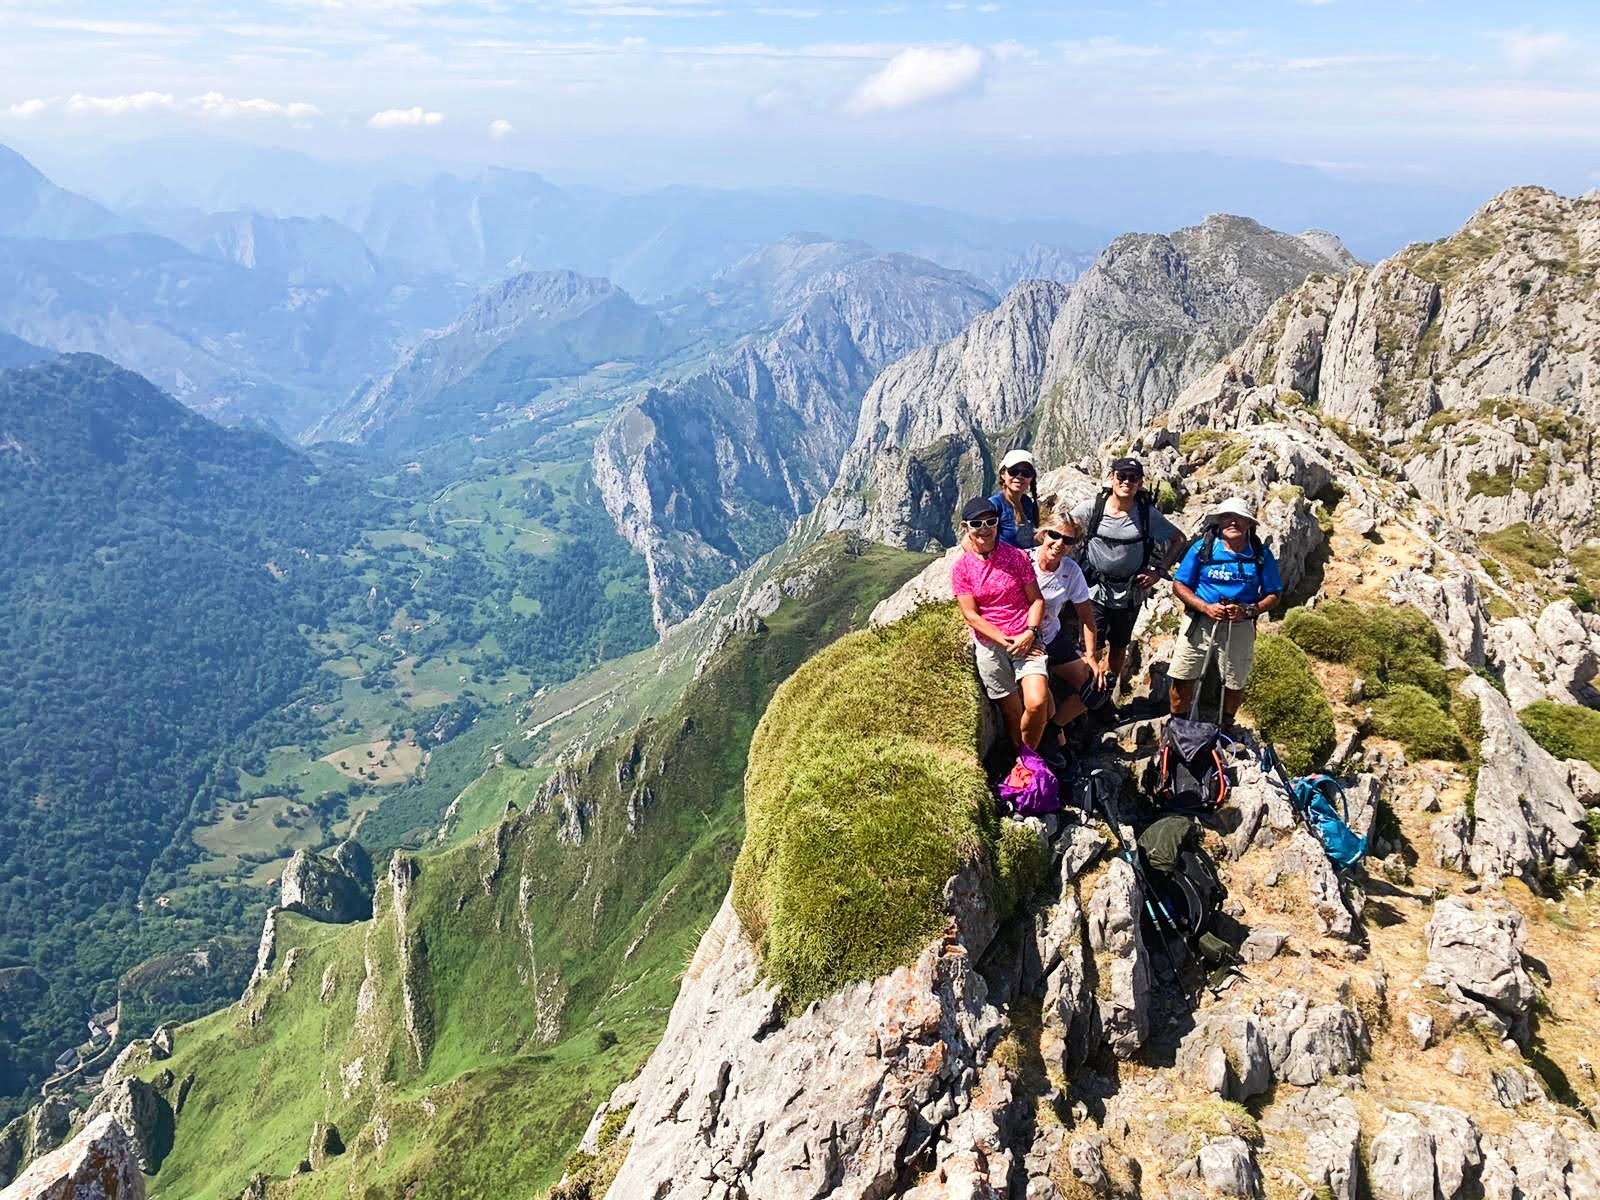 Hikers pose on top of a mountain in the Picos de Europa.